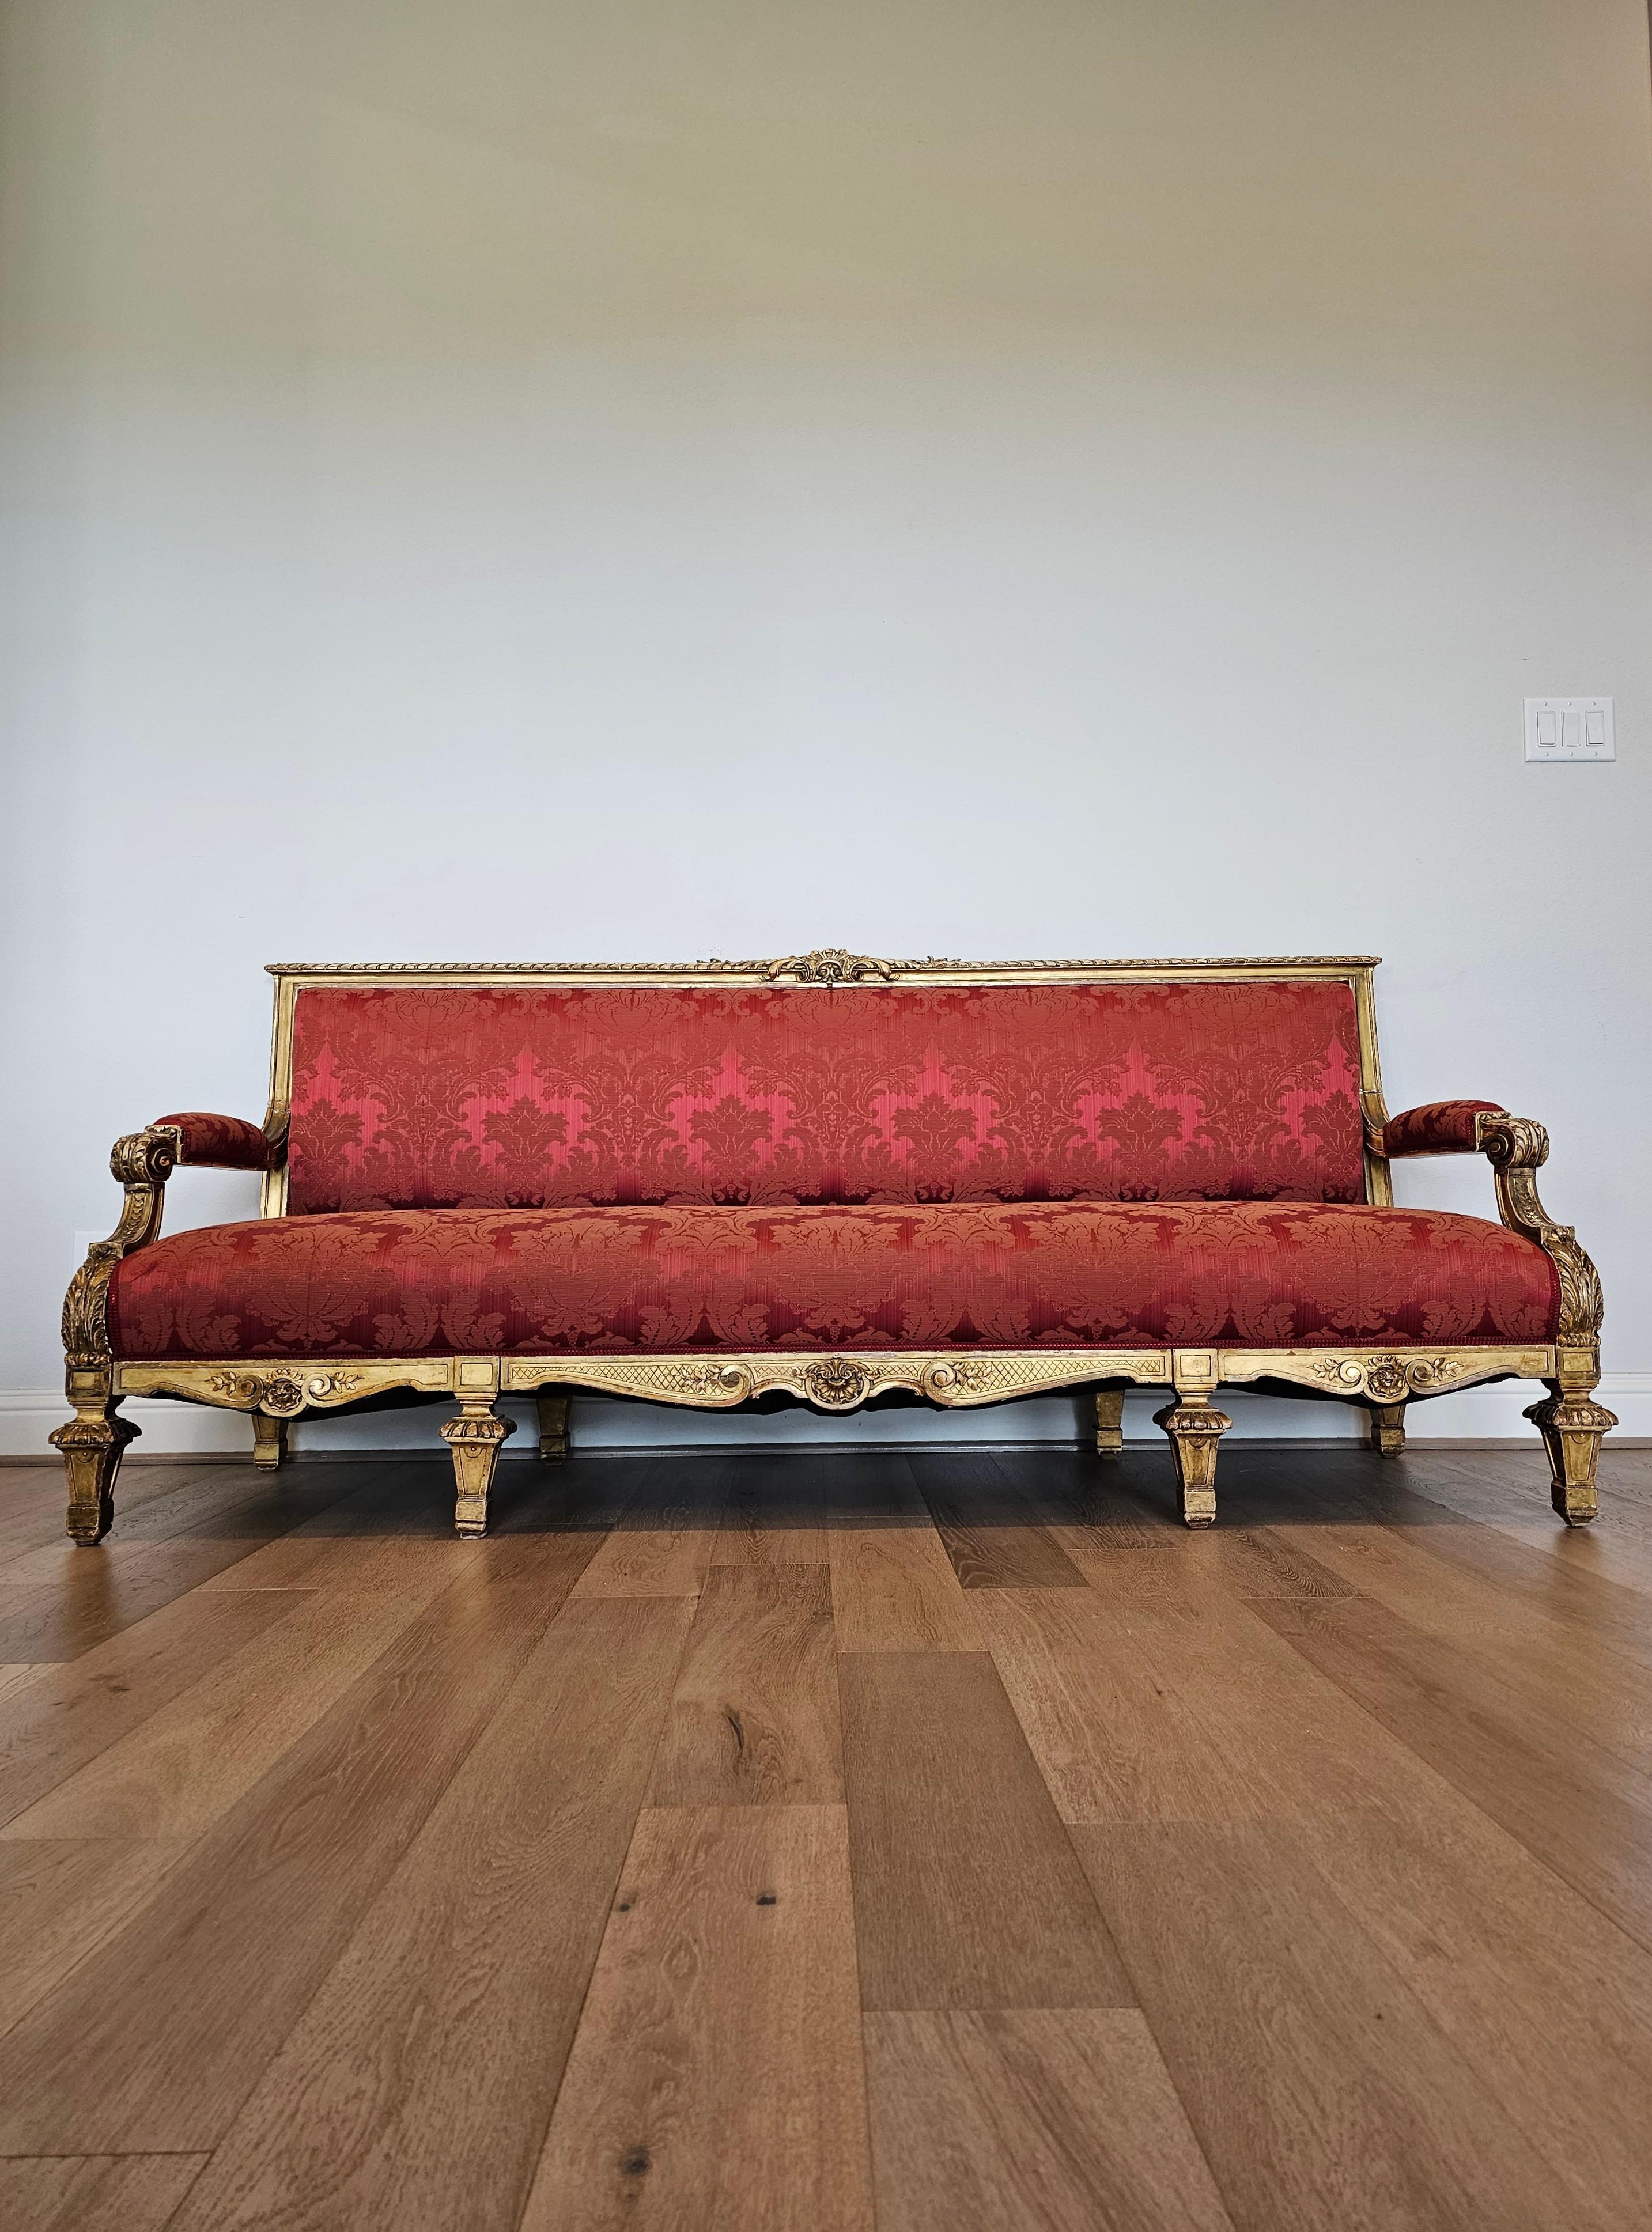 Antique French Louis XVI Style Giltwood Damask Upholstered Long Sofa Set For Sale 7